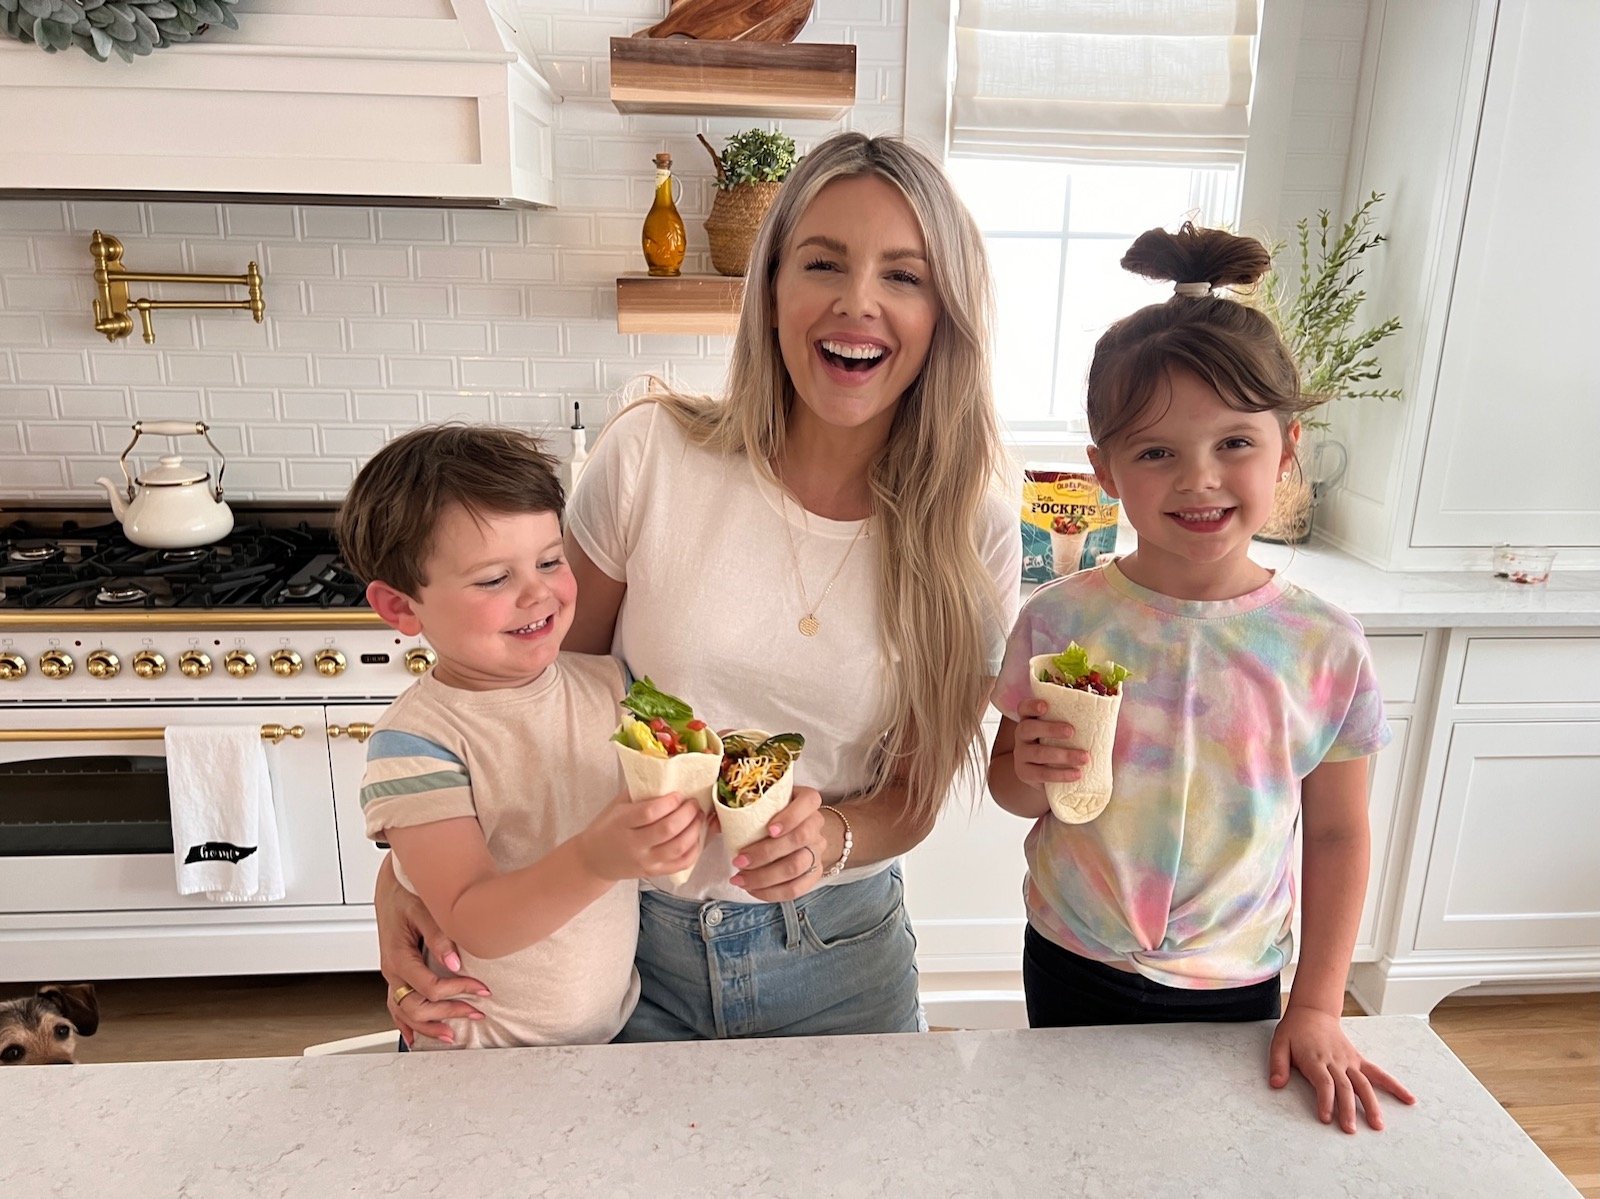 ‘Bachelorette’ Ali Fedotowsky-Manno Recalls Her Daughter’s Scary Hospitalization – What She Wish She Had Known [Exclusive]